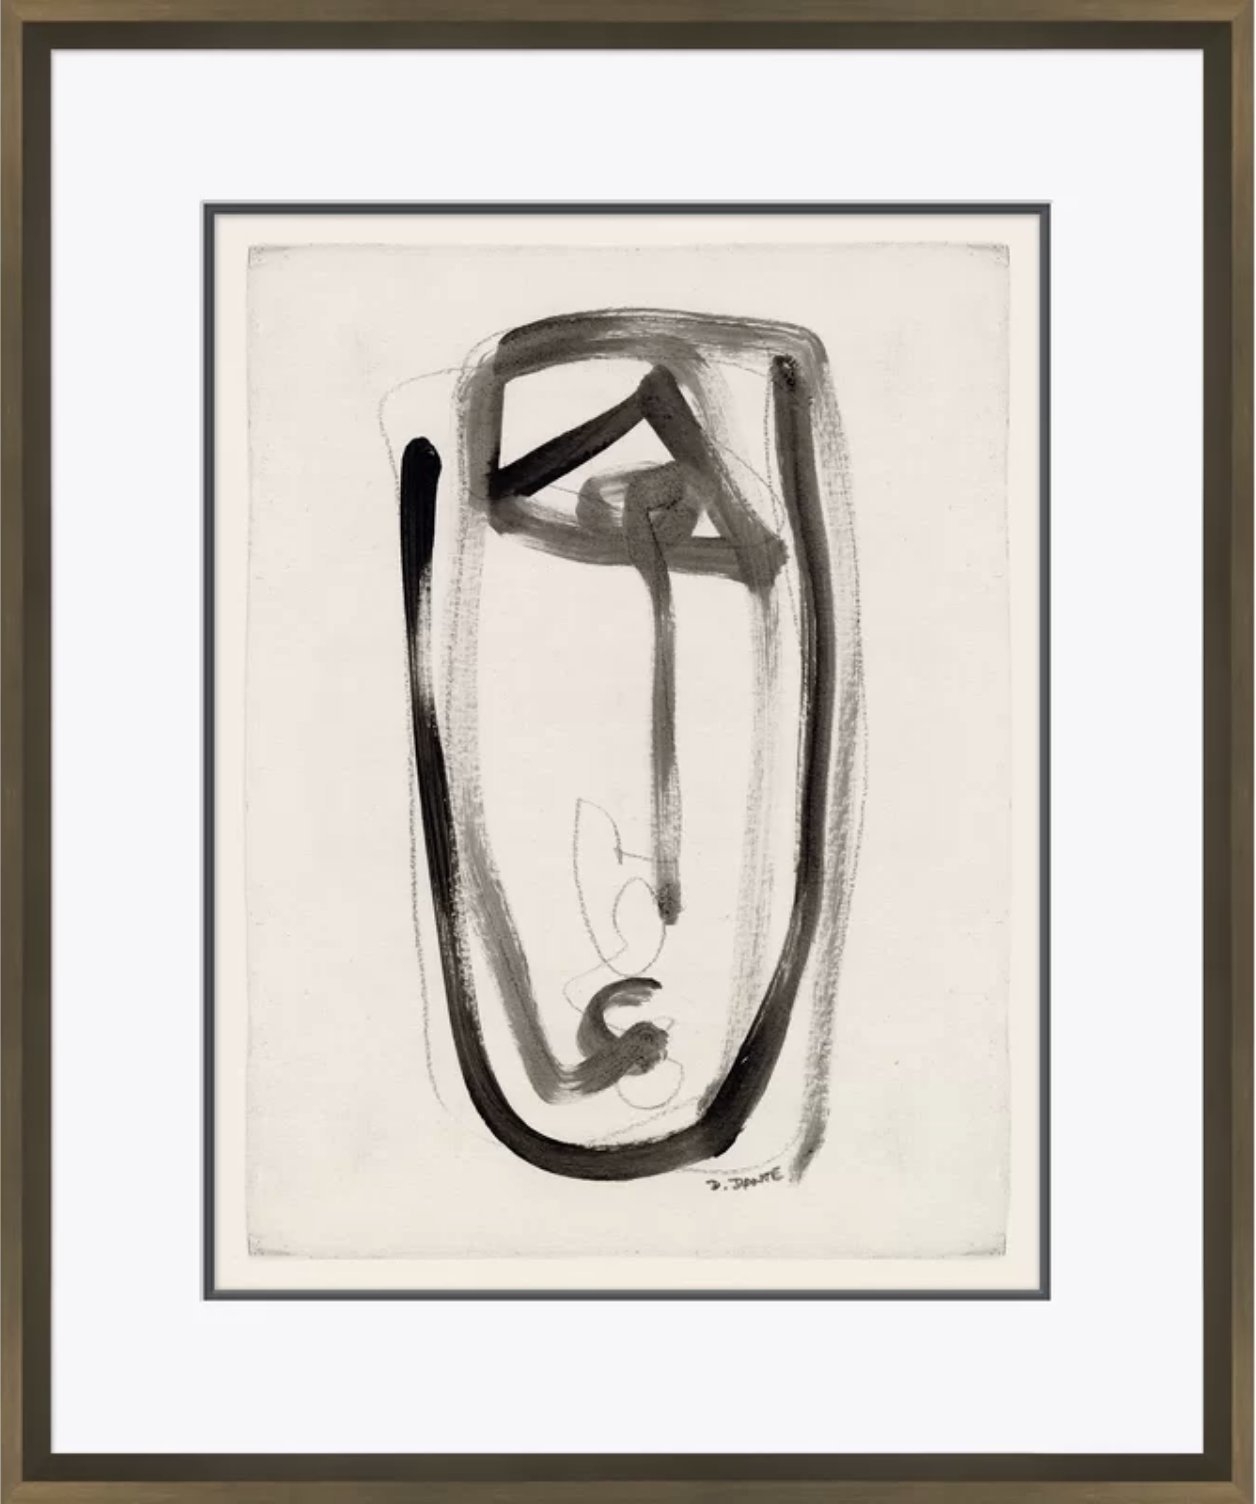 Soicher Marin 'Abstracts in Black and White' - Picture Frame Painting on Paper - Image 0